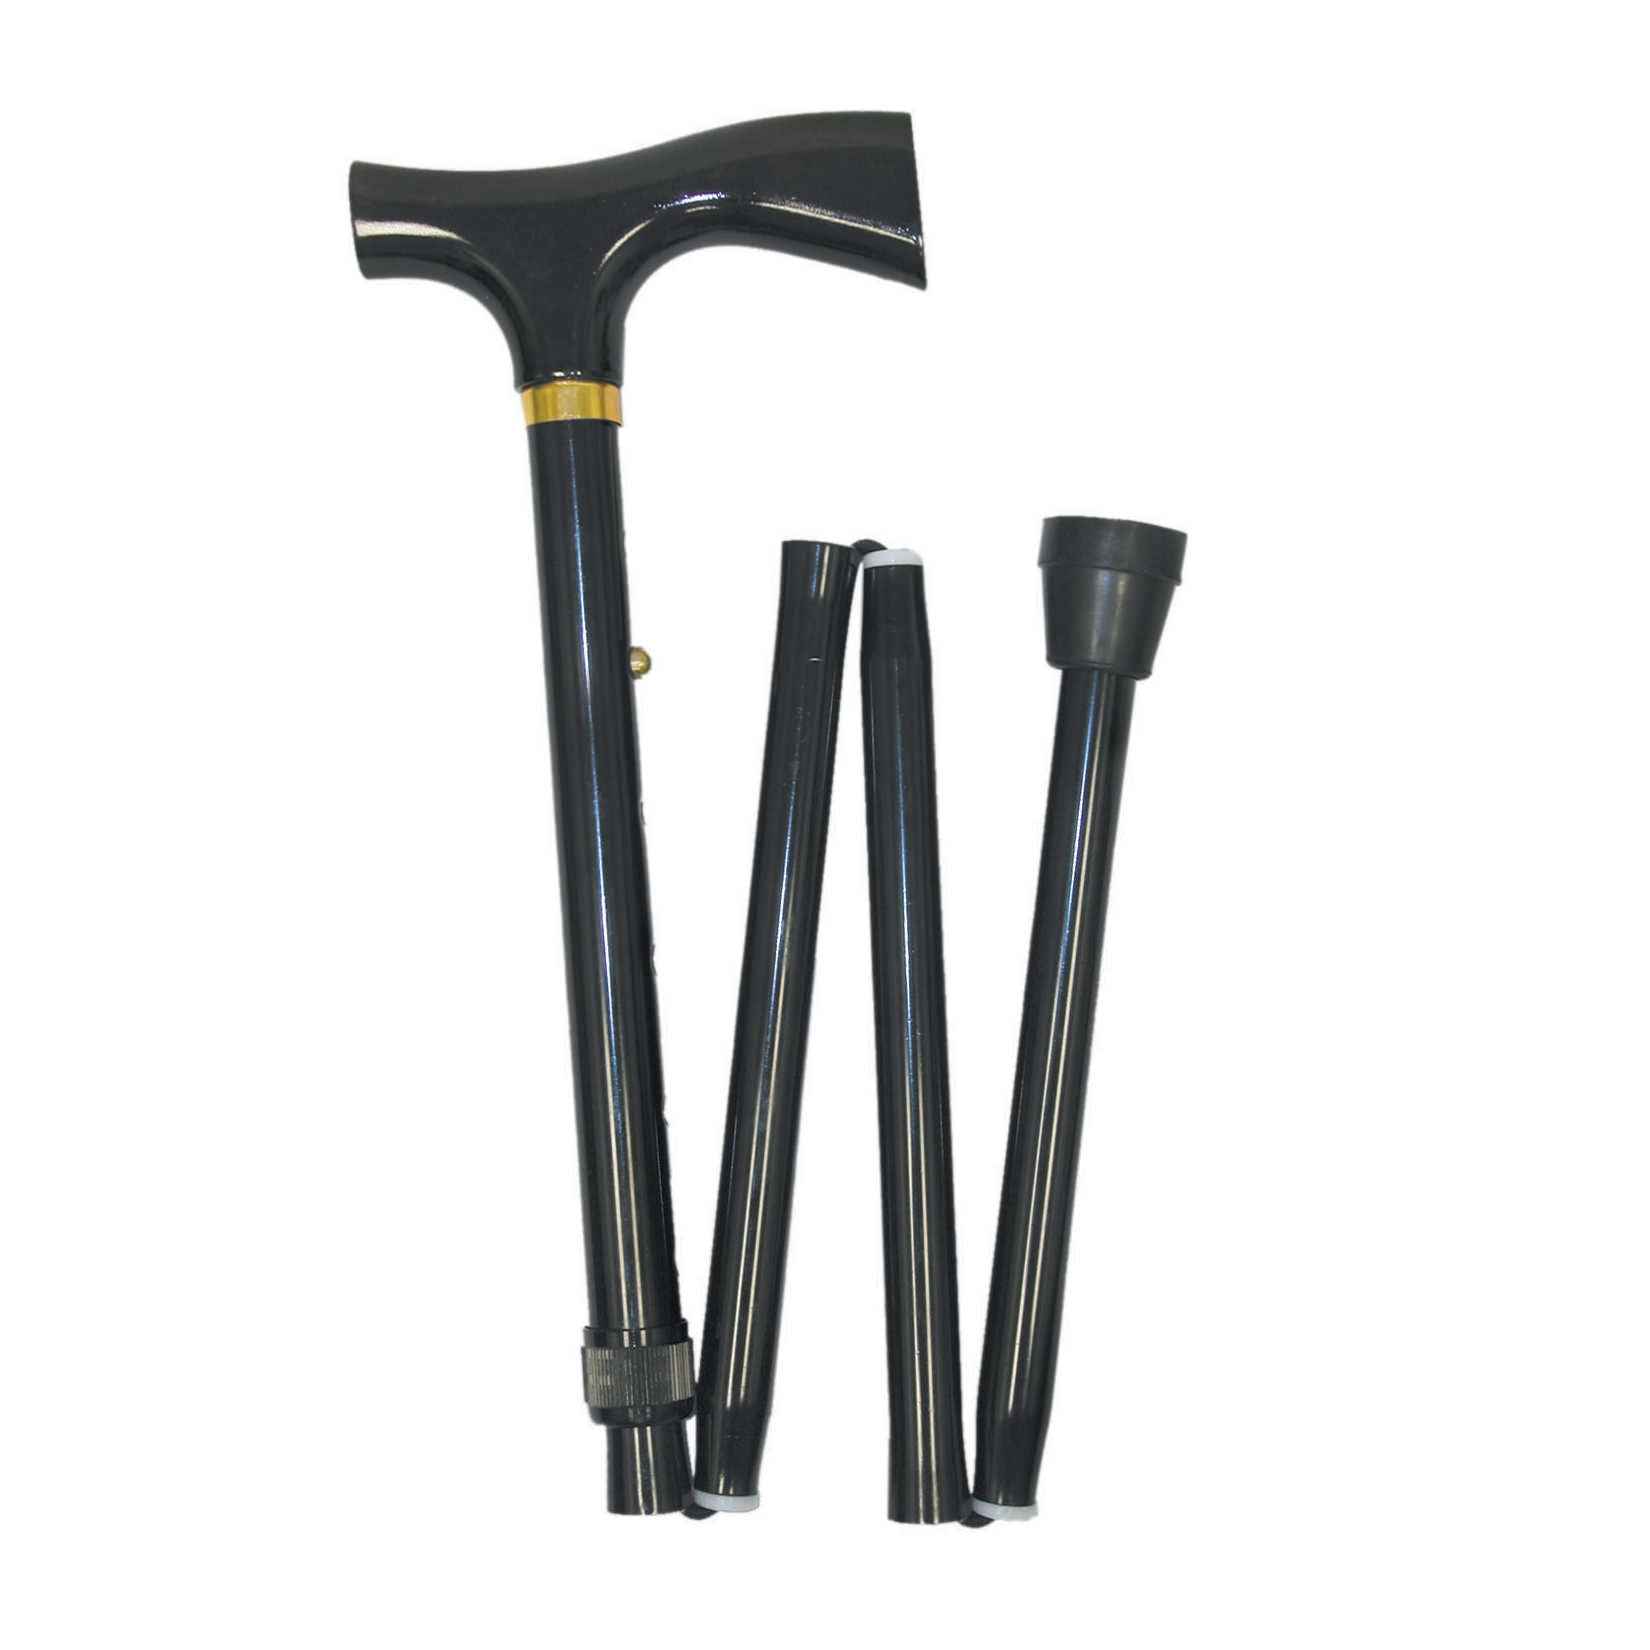 Mabis Adjustable Folding Cane with Derby Handle - Just Walkers